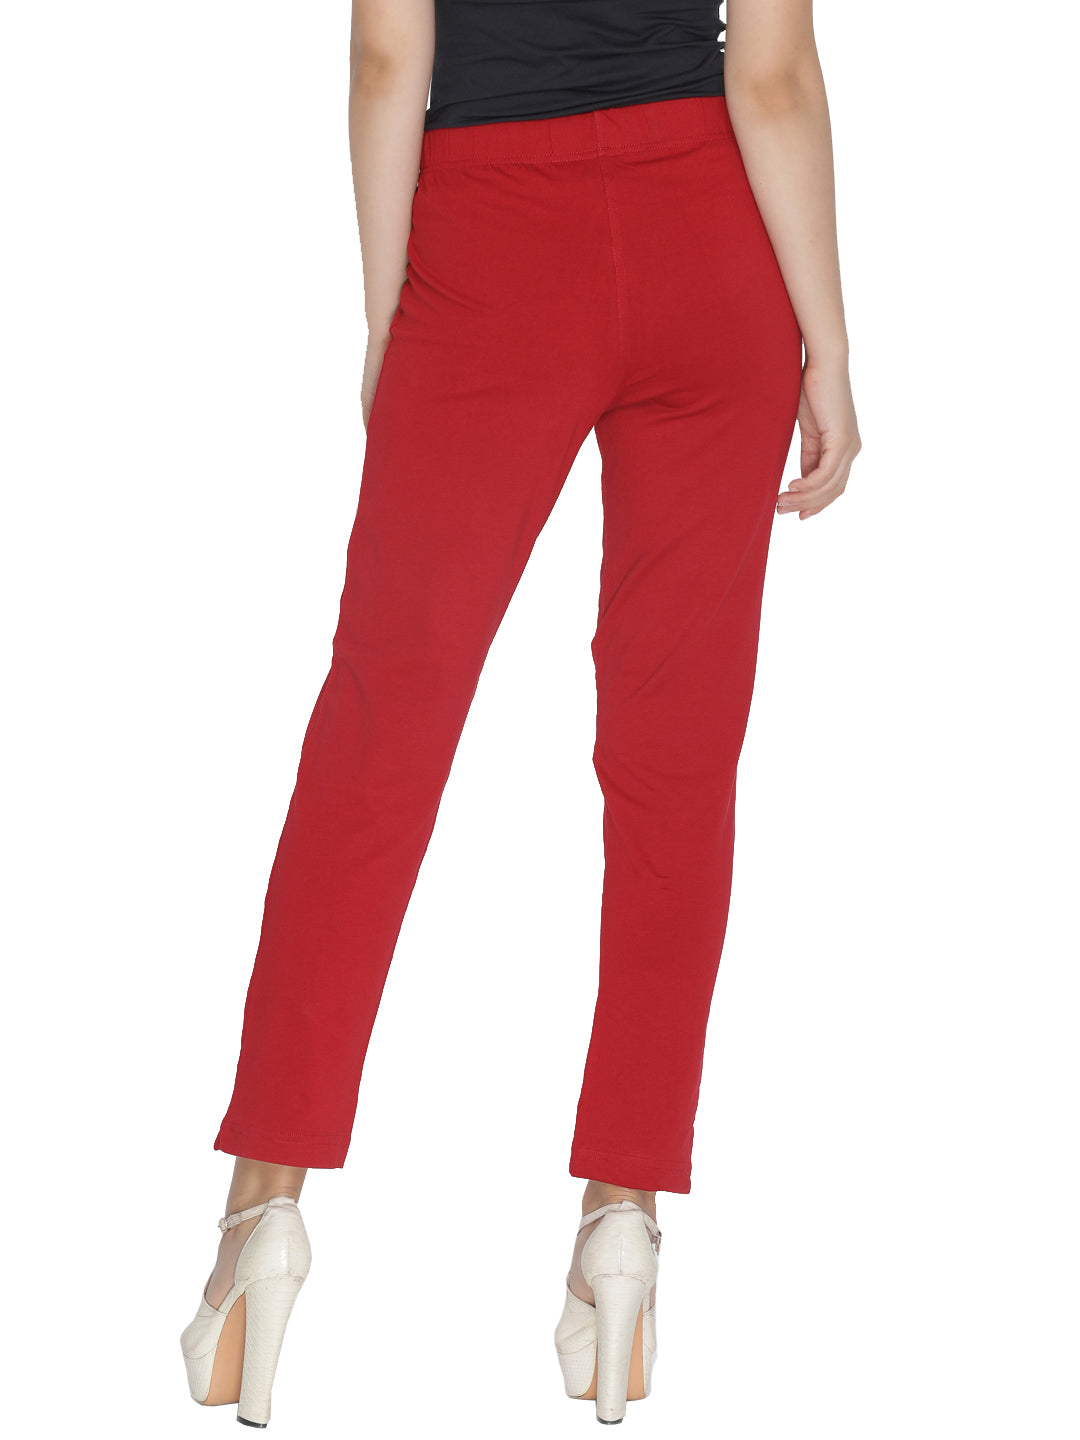 HM Cigarette trousers  Red  Ladies  HM IN